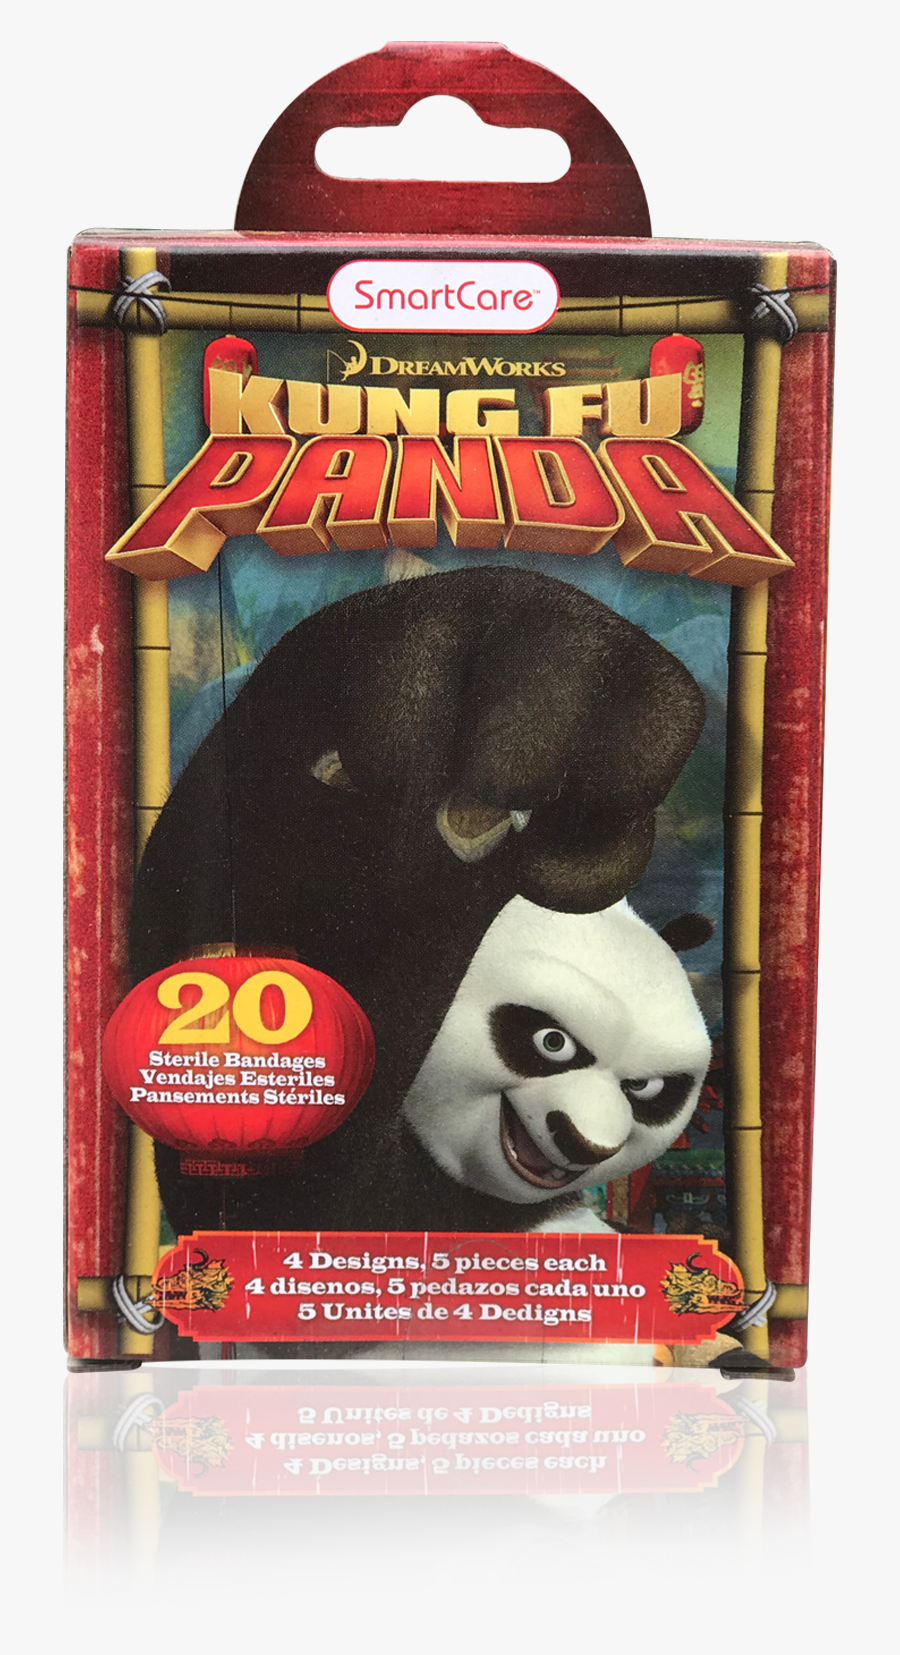 Load Image Into Gallery Viewer, Smart Care Kung Fu - Panda, Transparent Clipart